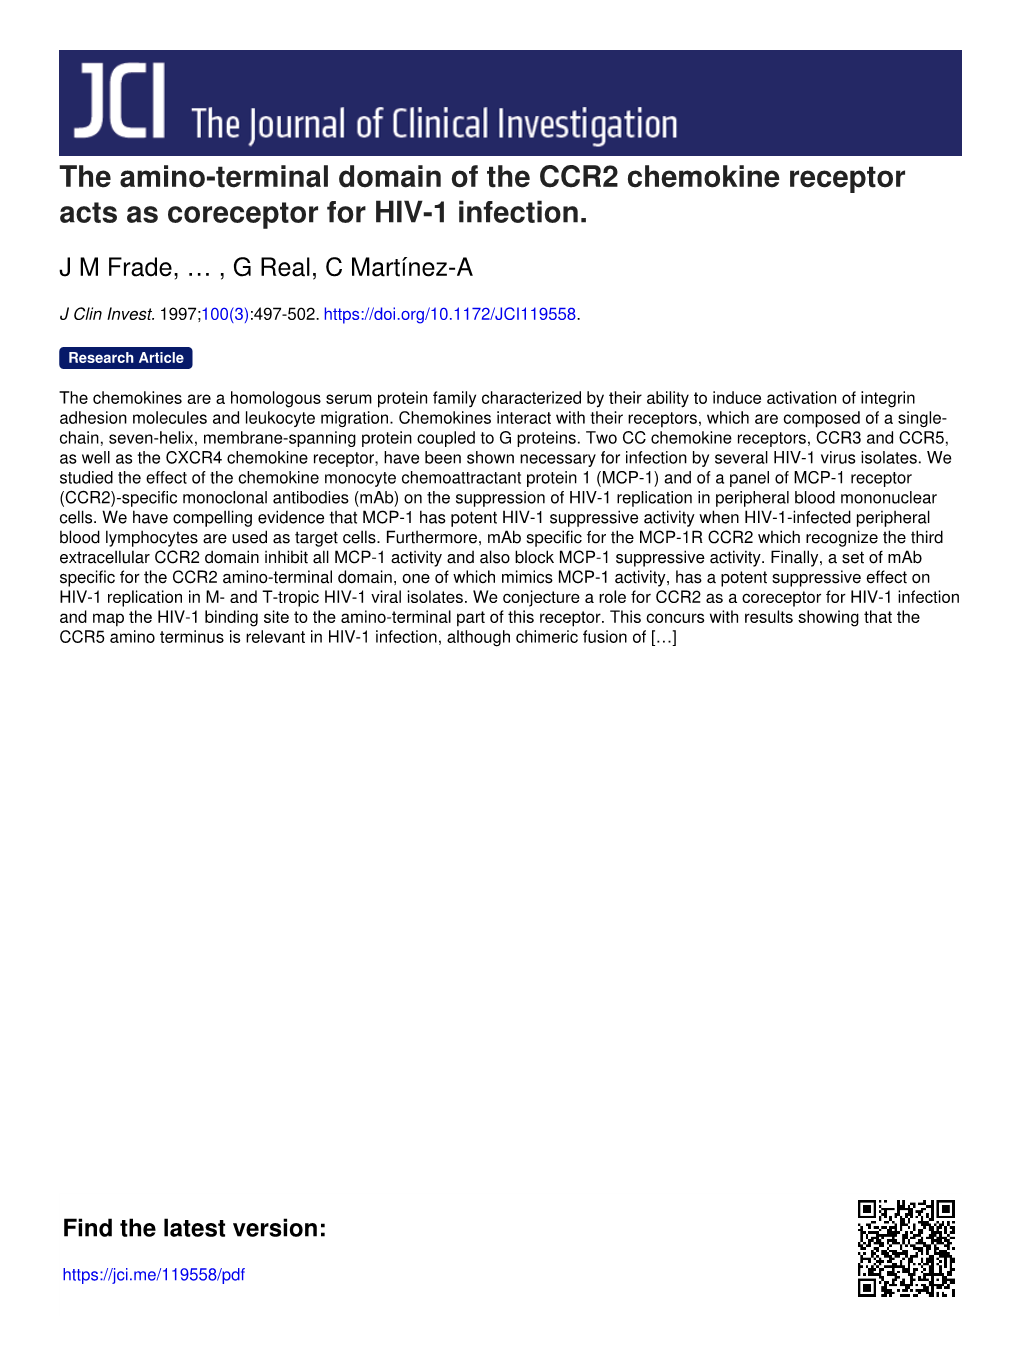 The Amino-Terminal Domain of the CCR2 Chemokine Receptor Acts As Coreceptor for HIV-1 Infection